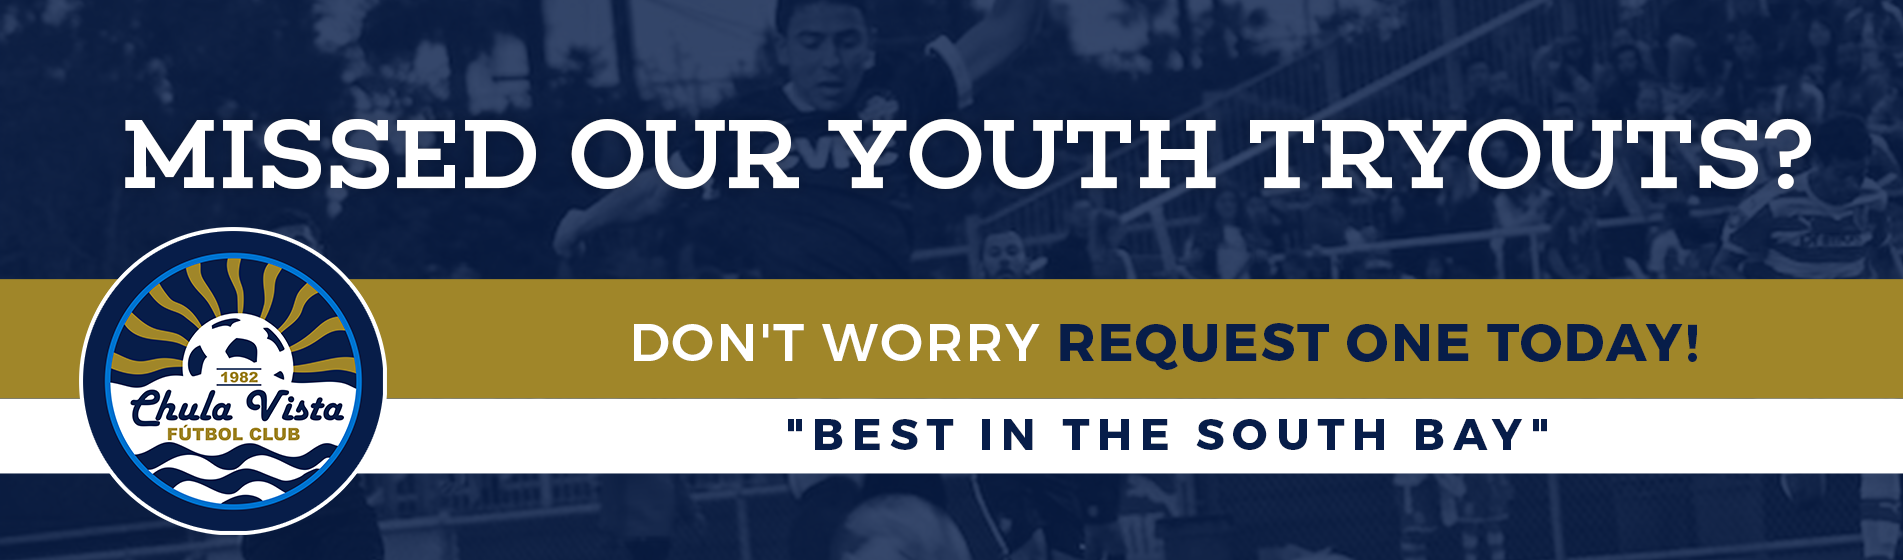 Younger Youth Tryouts Announced